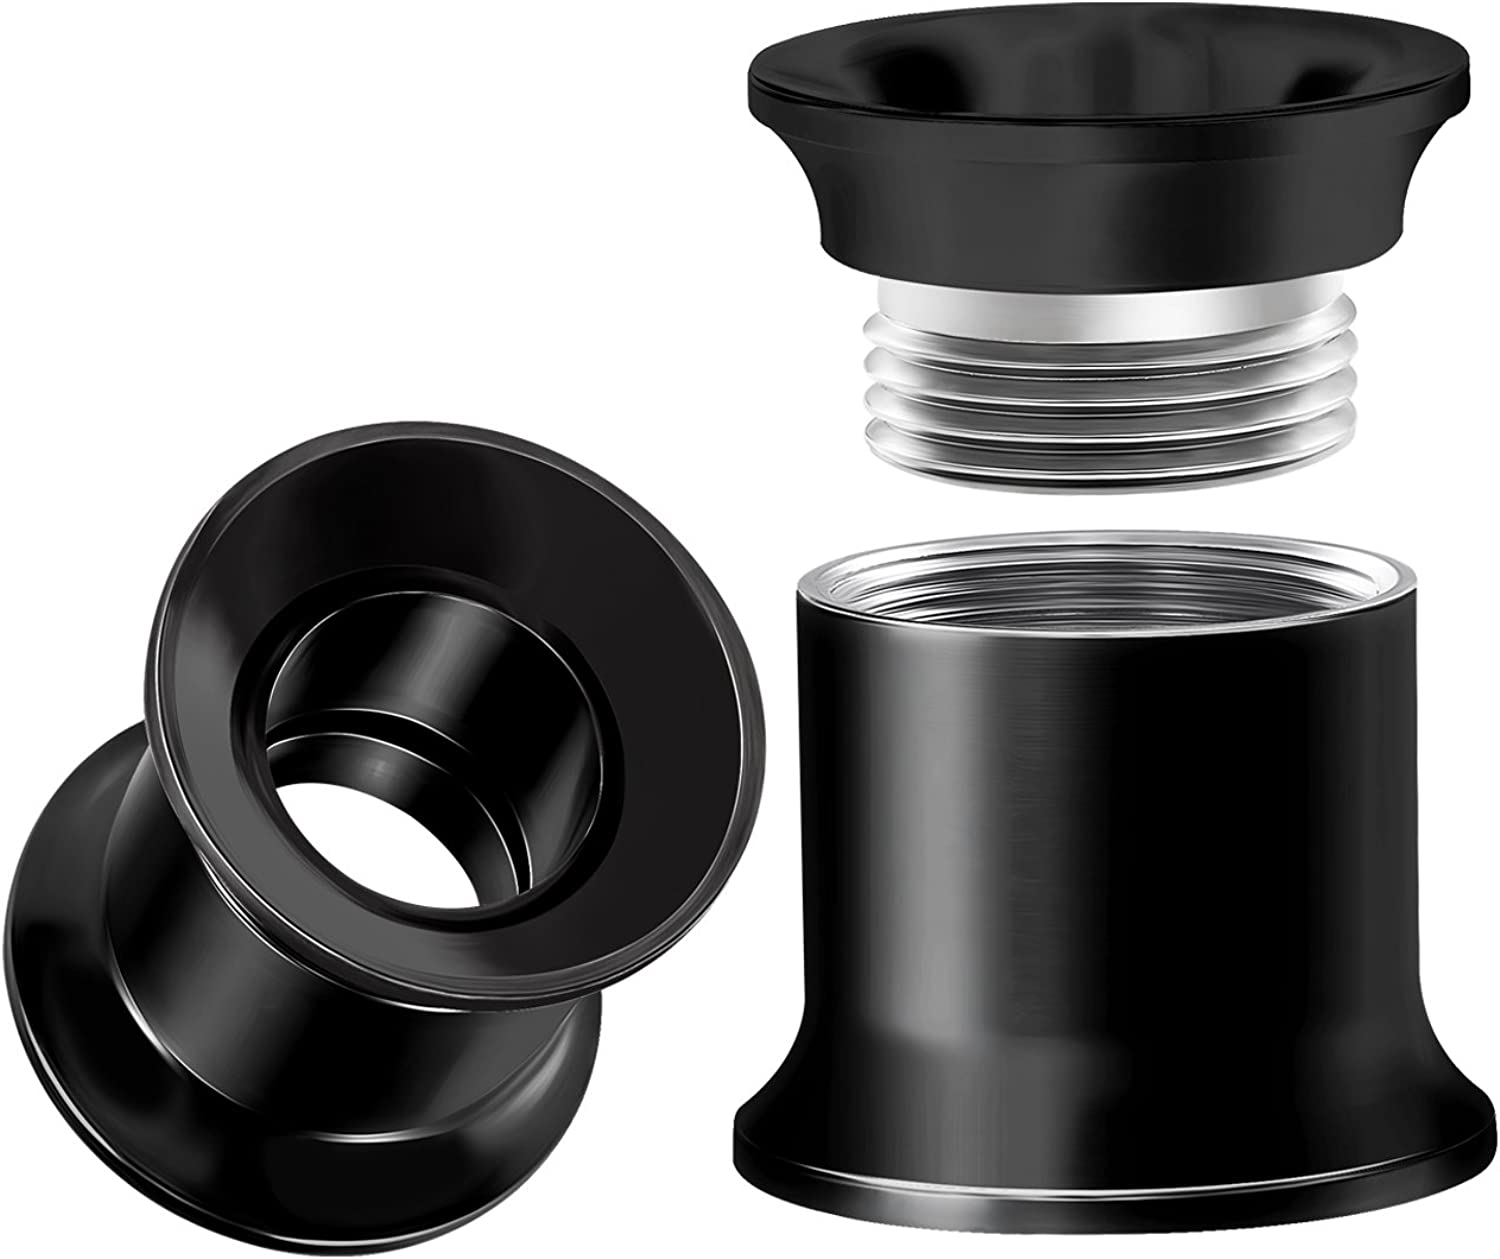 Pair of Internally Threaded Surgical Steel Black Double Flared Piercing Jewelry Stretcher Ear Plug Earring Lobe Tunnel